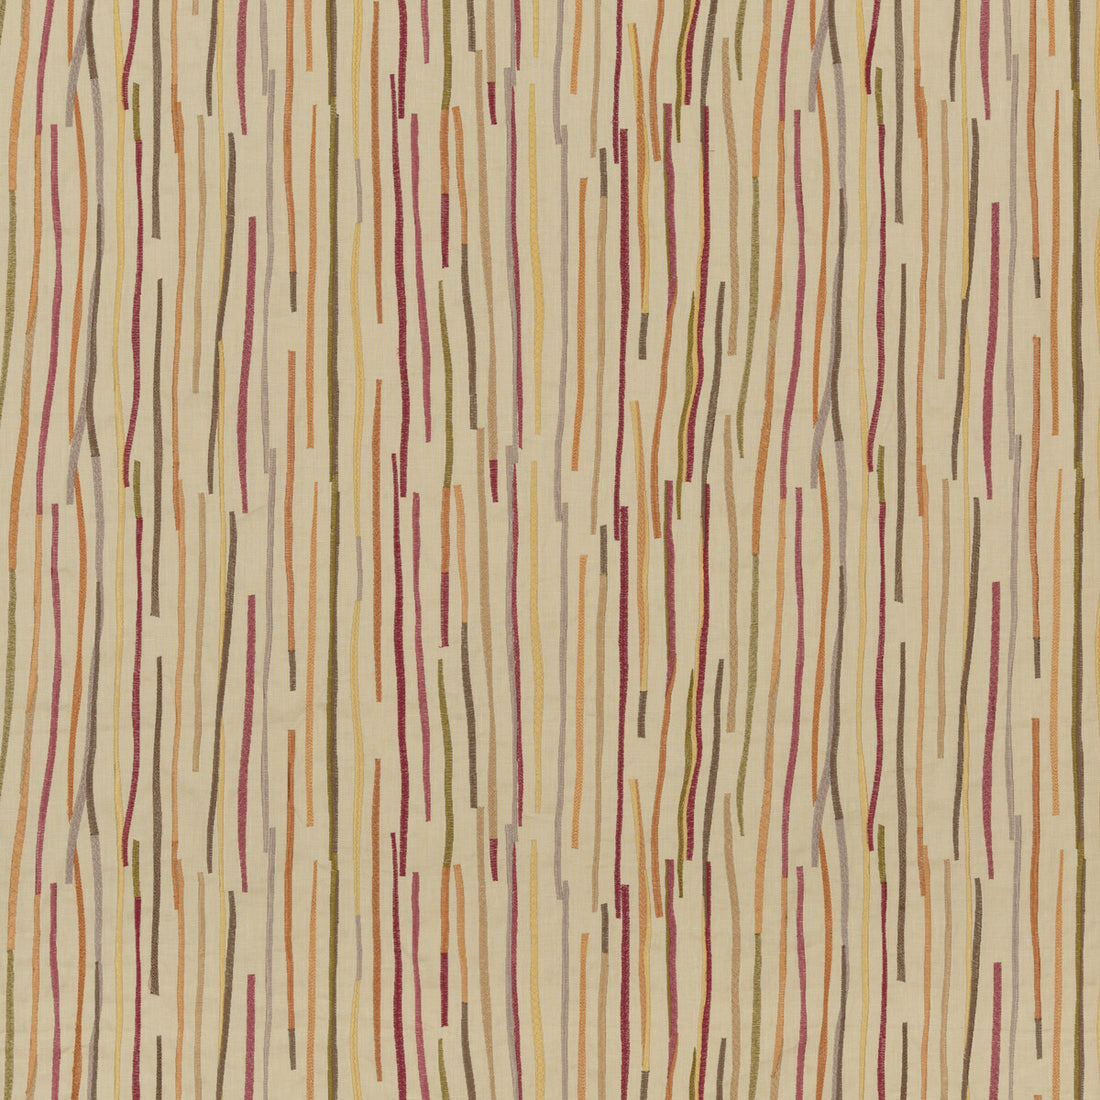 Fiesta Stripe fabric in red/sienna color - pattern FD769.V165.0 - by Mulberry in the Festival collection